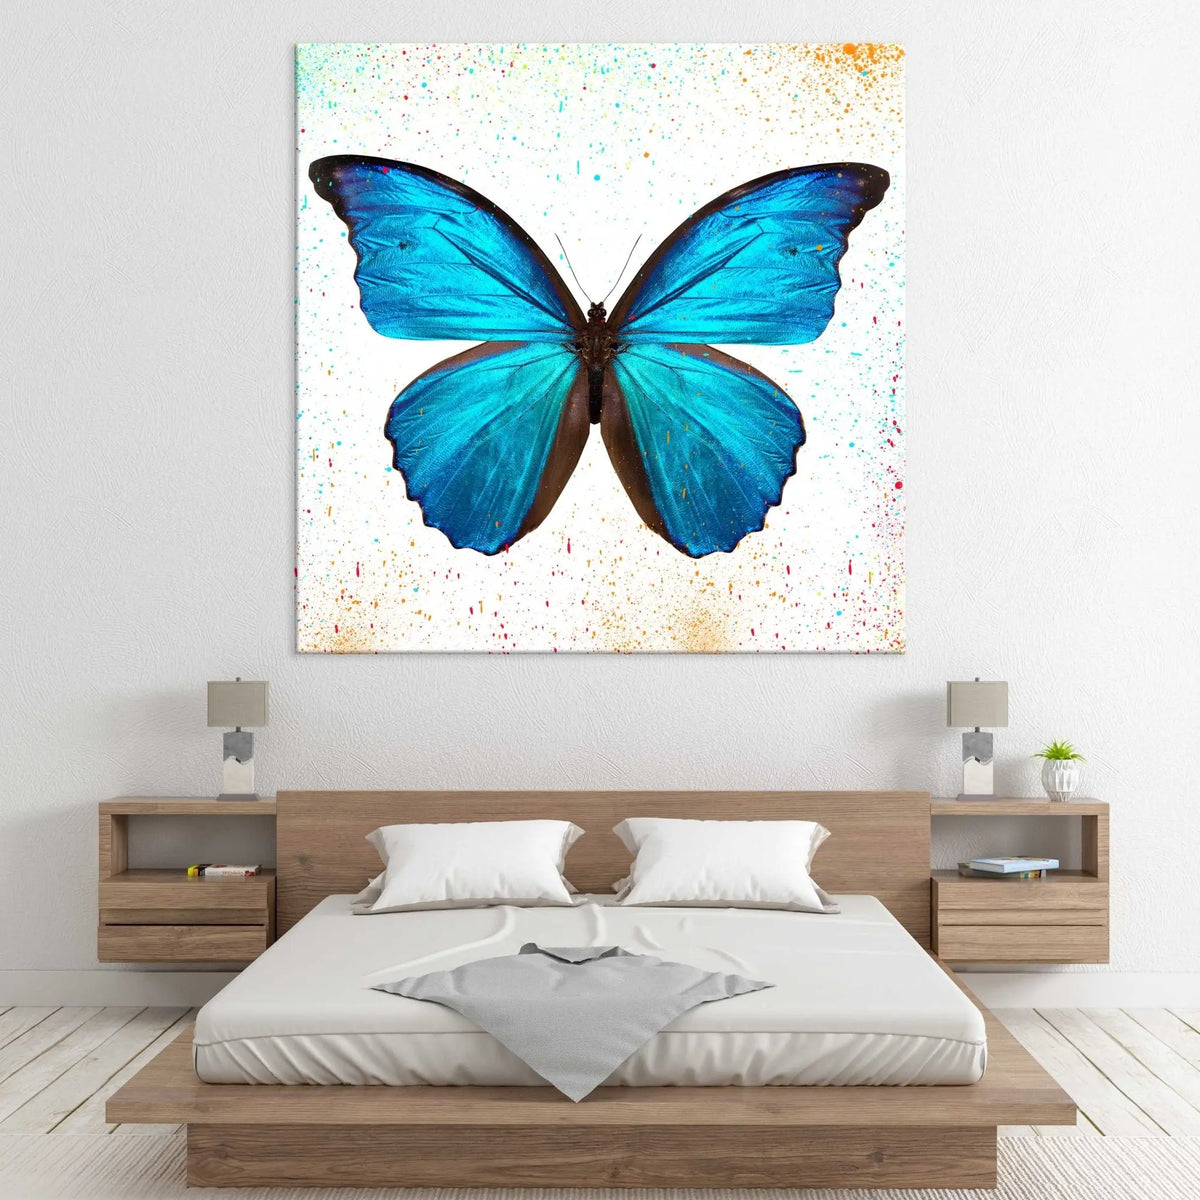 "BUTTERFLY EFFECT" - Art For Everyone